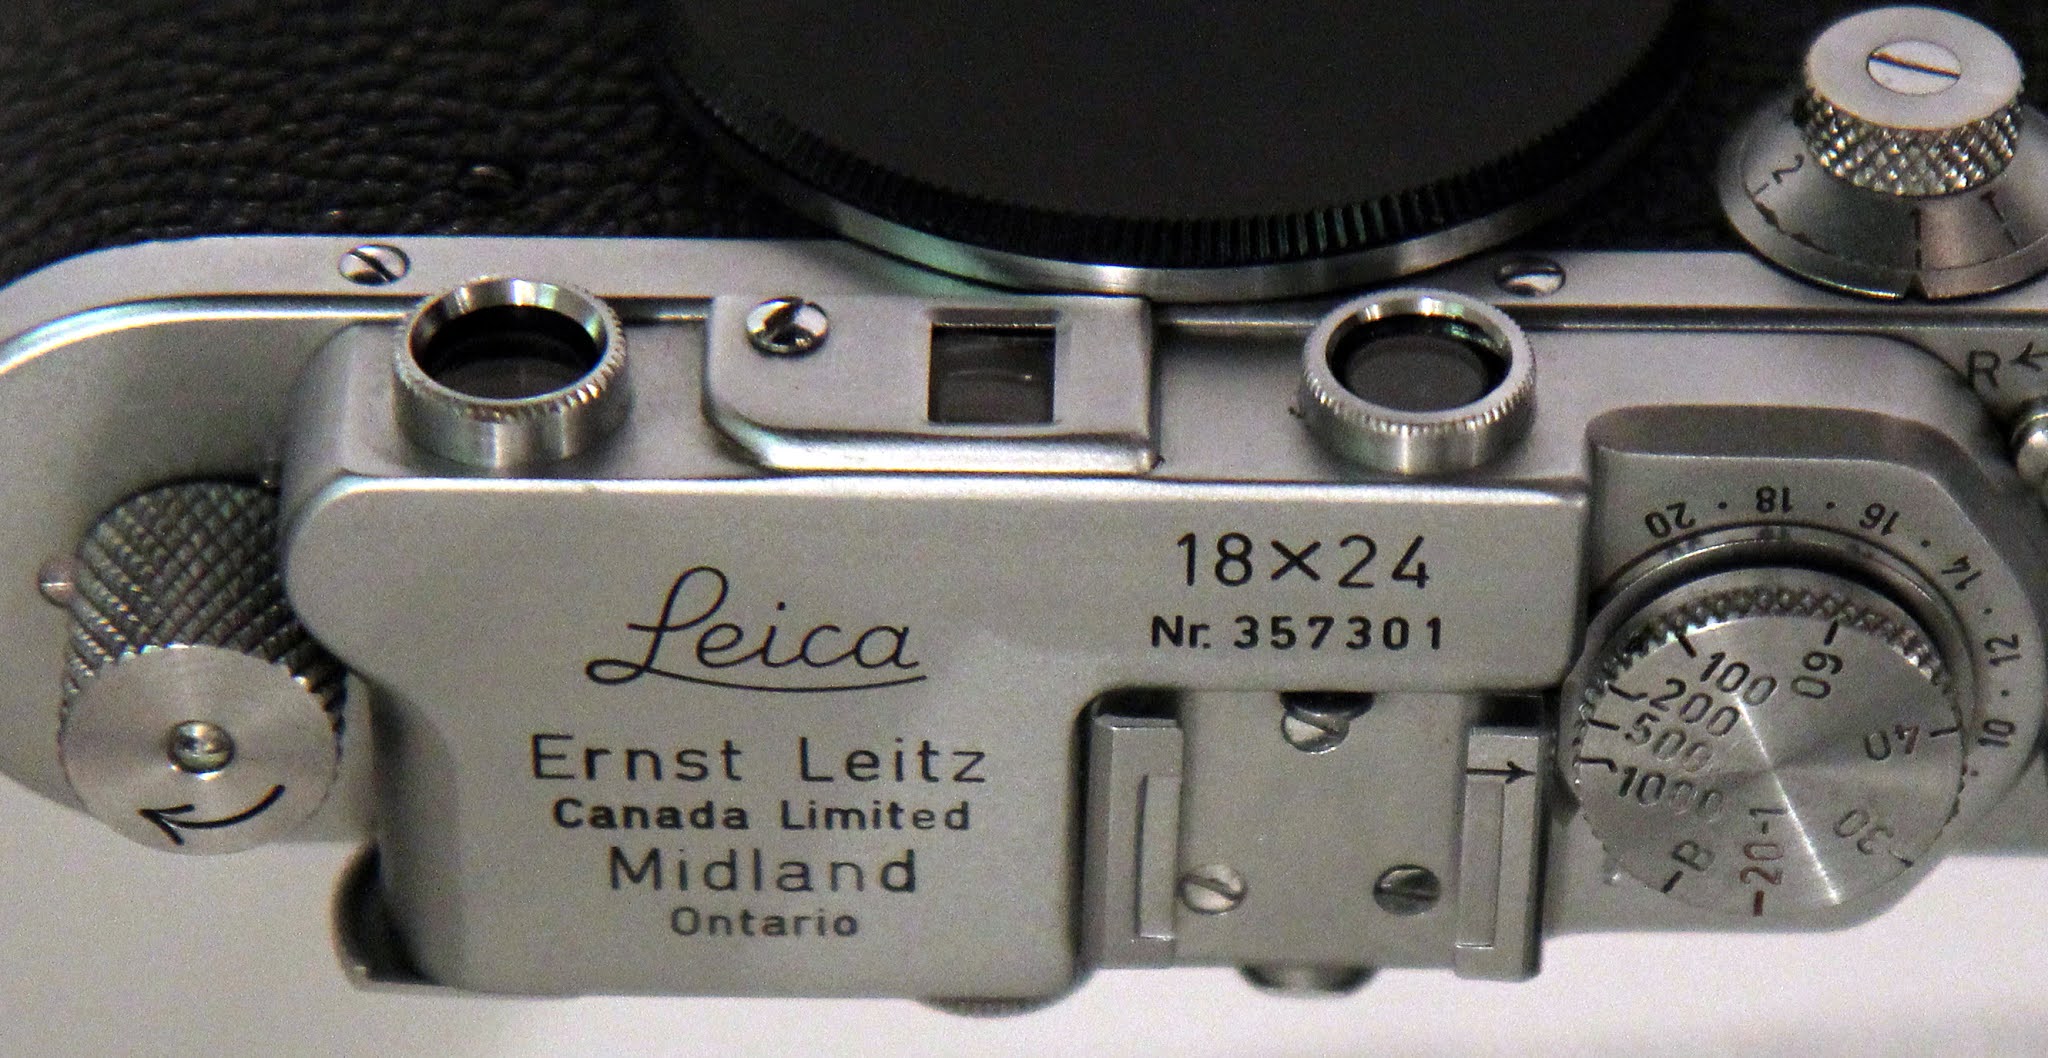 The Leica M3: 5 reasons why it's the greatest camera ever - EMULSIVE